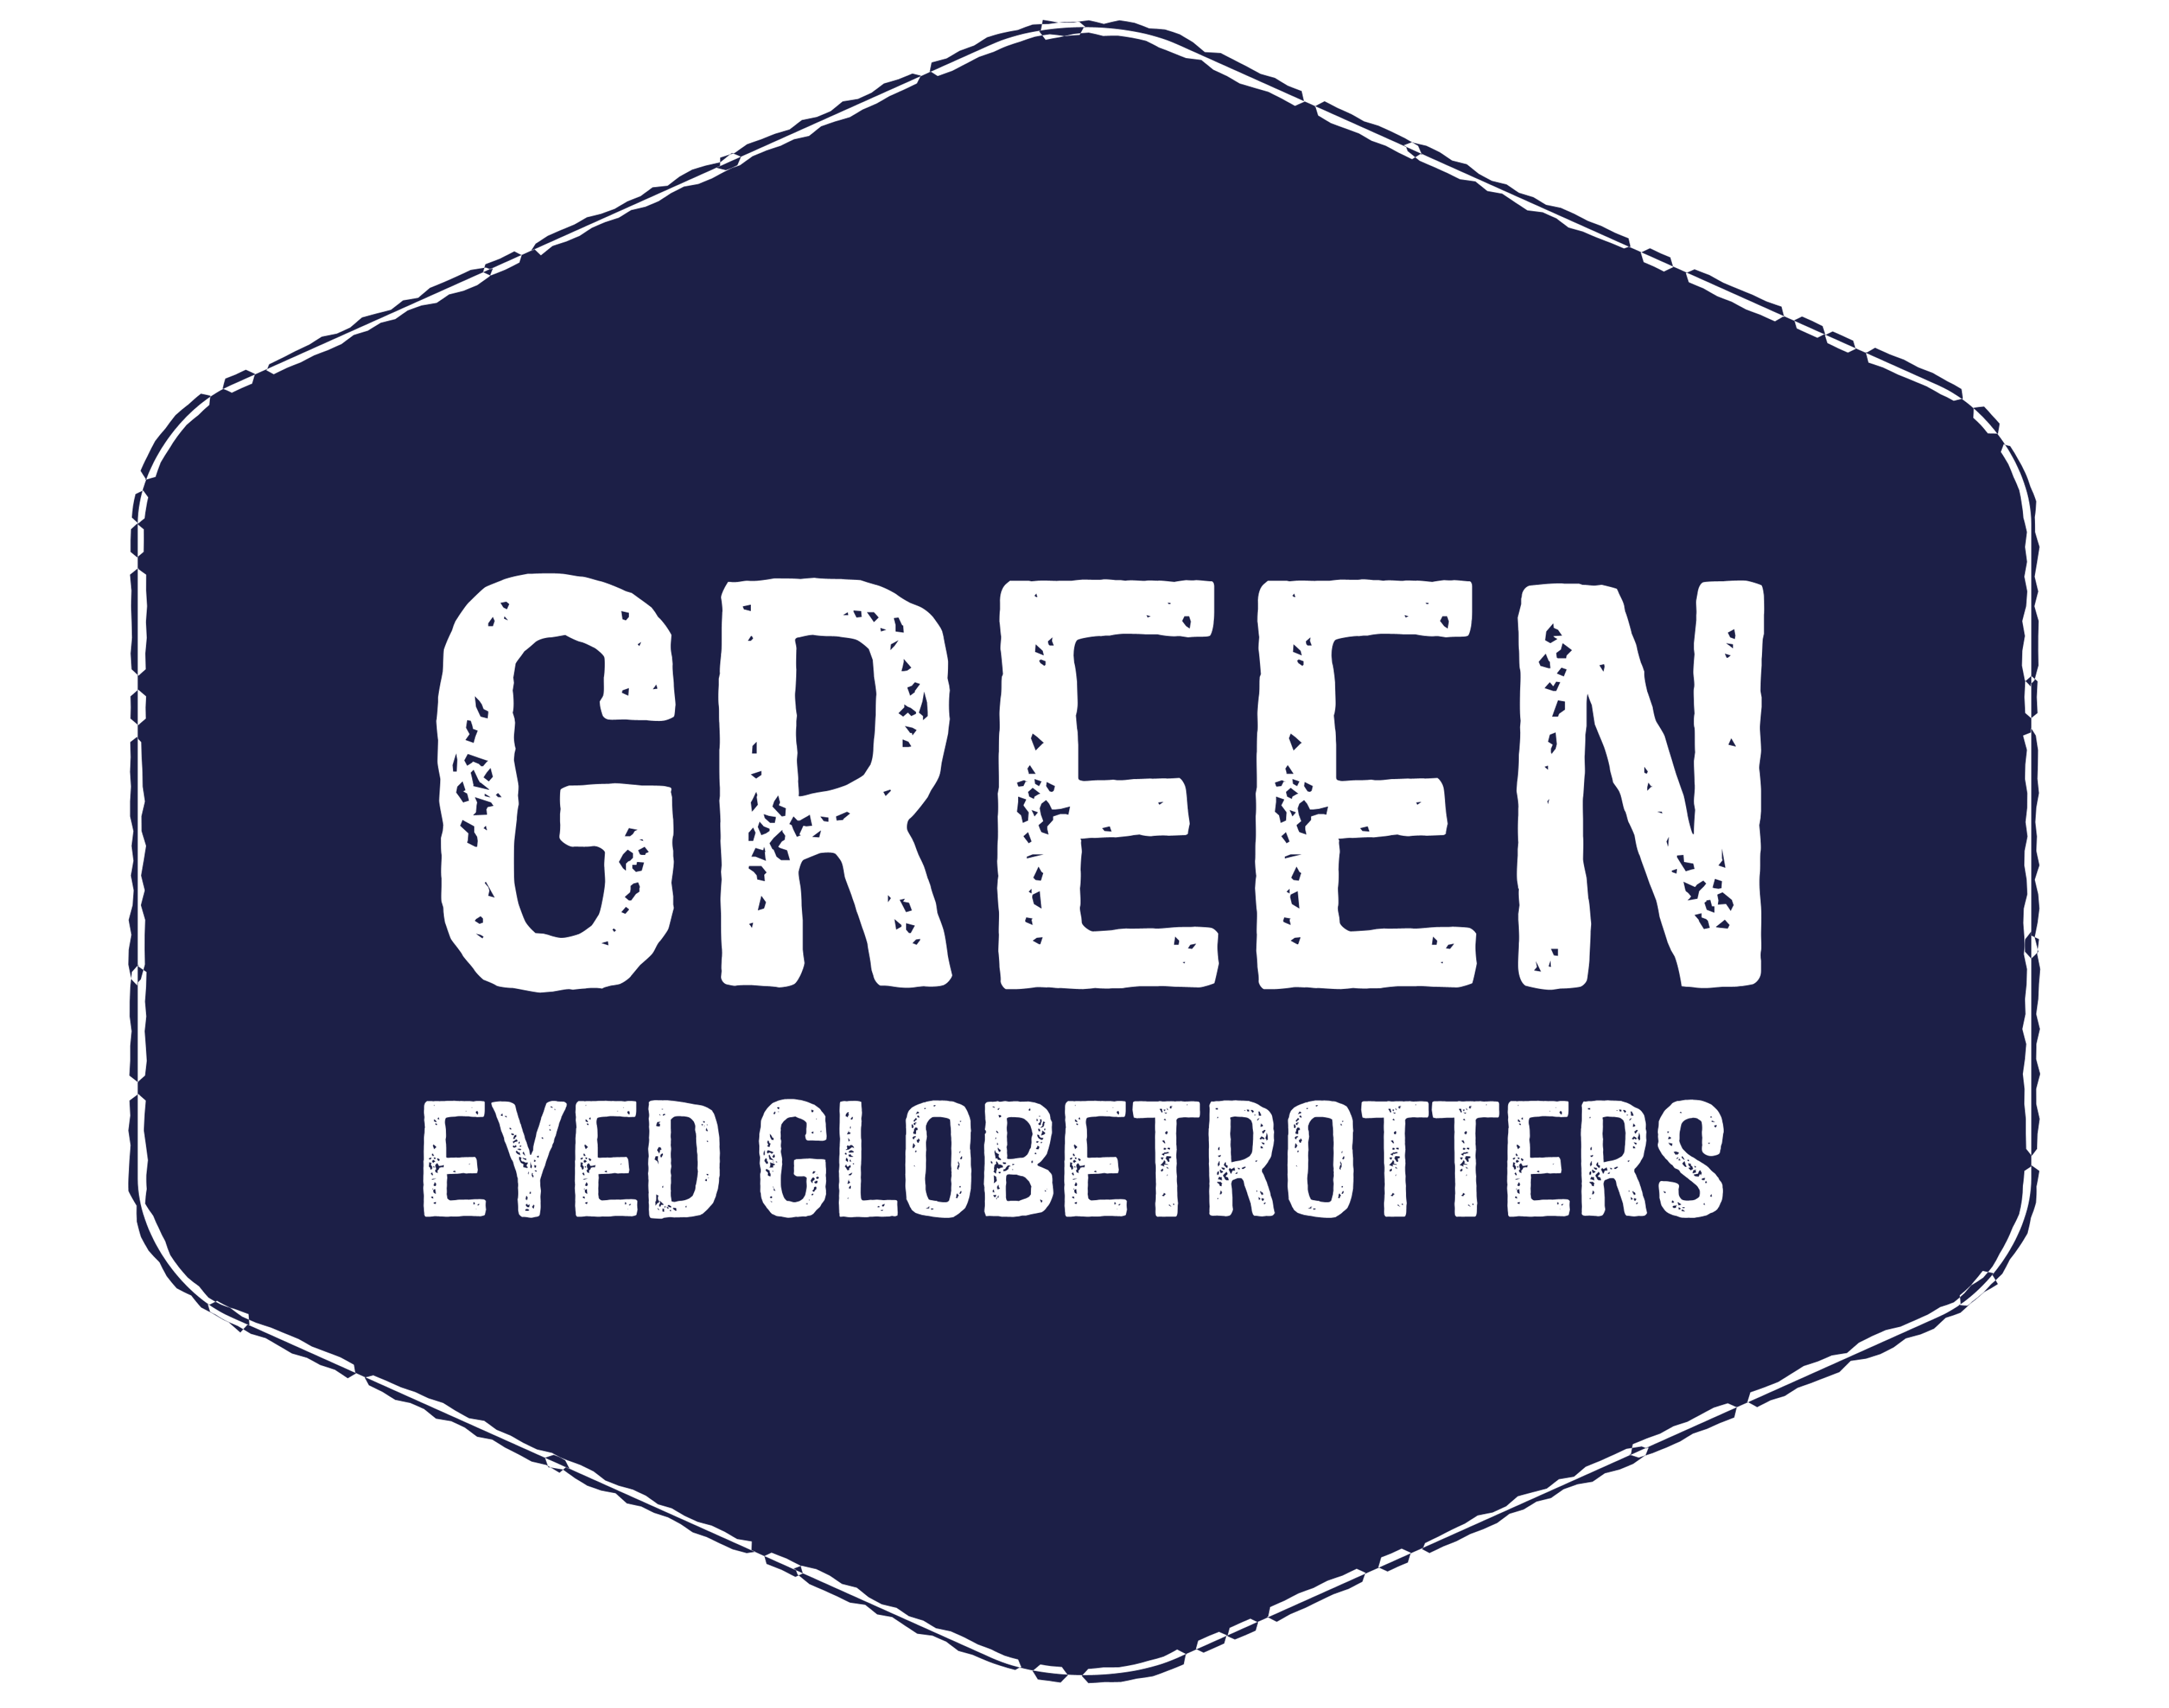 Green Eyed Globetrotters